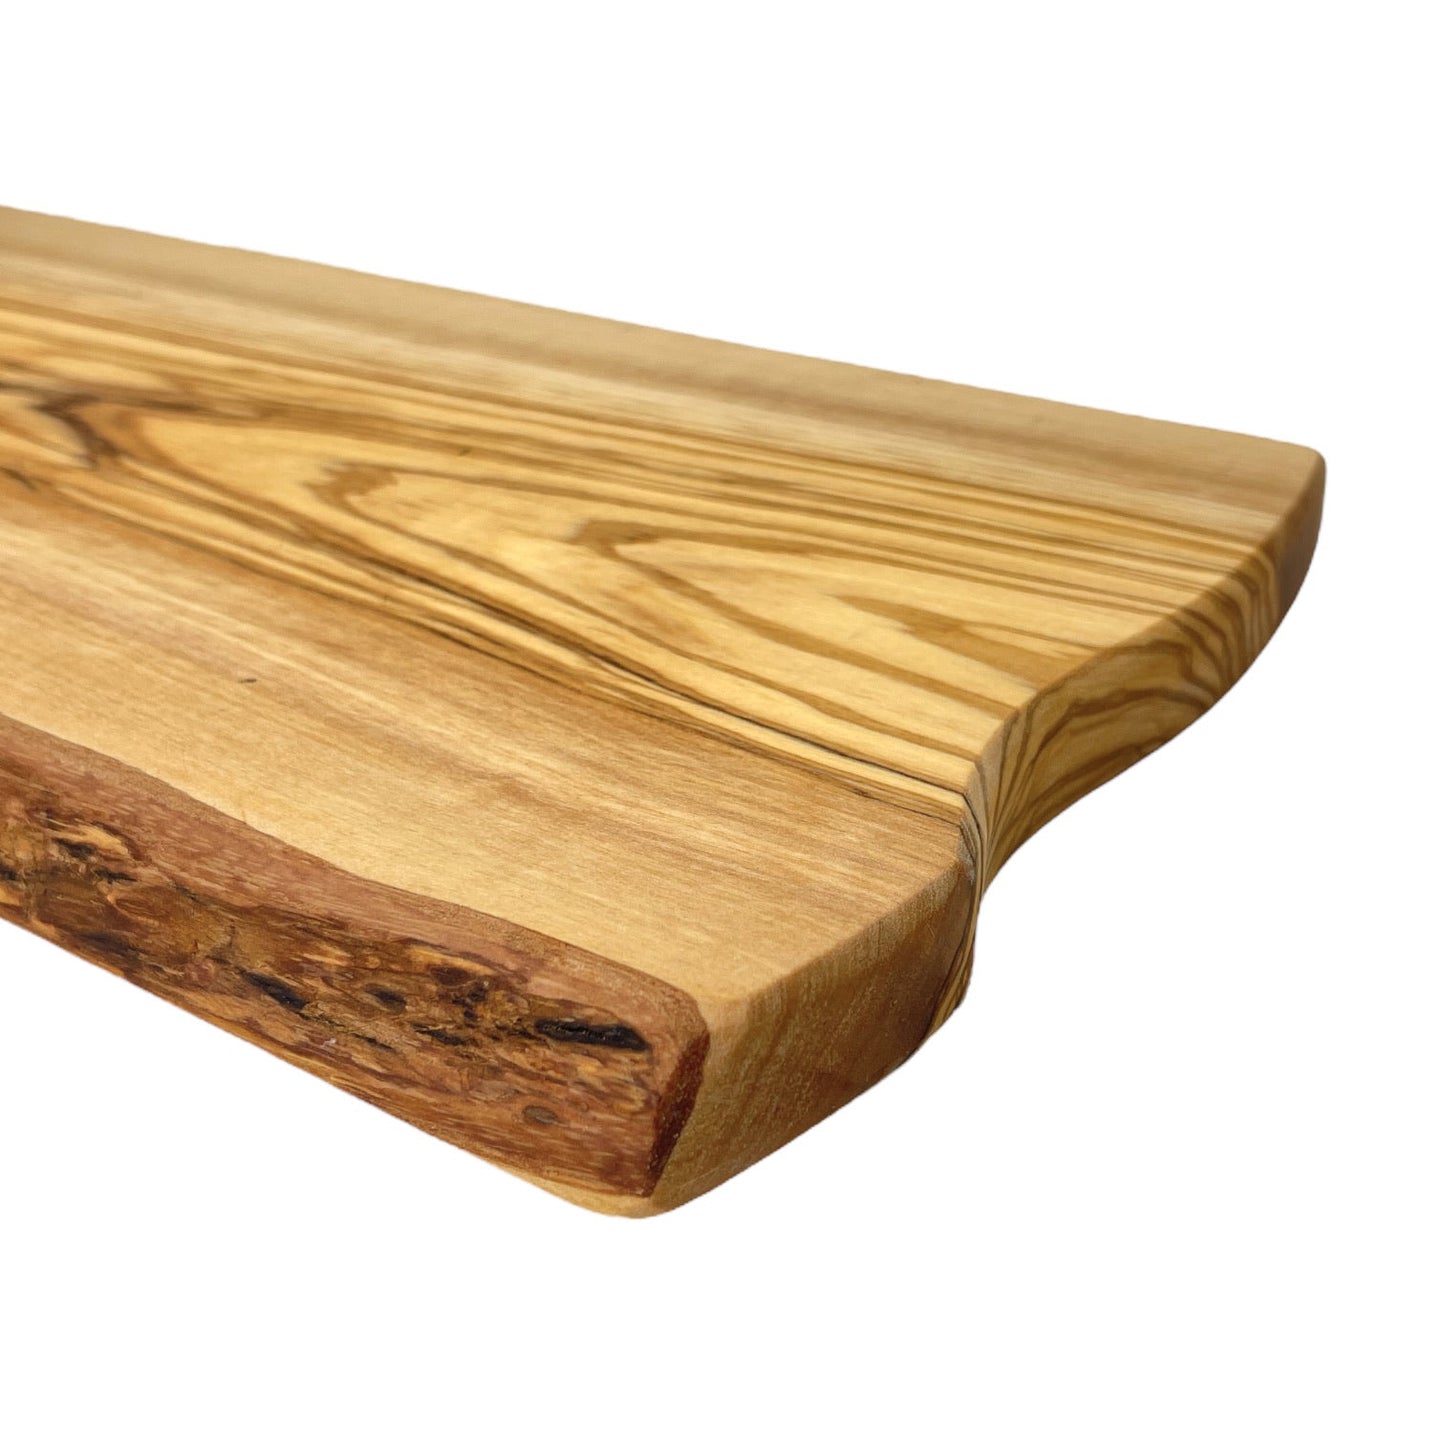 Live-edge Rustic Olive Wood - Handmade Charcuterie Boards - RTS tray edge detail view